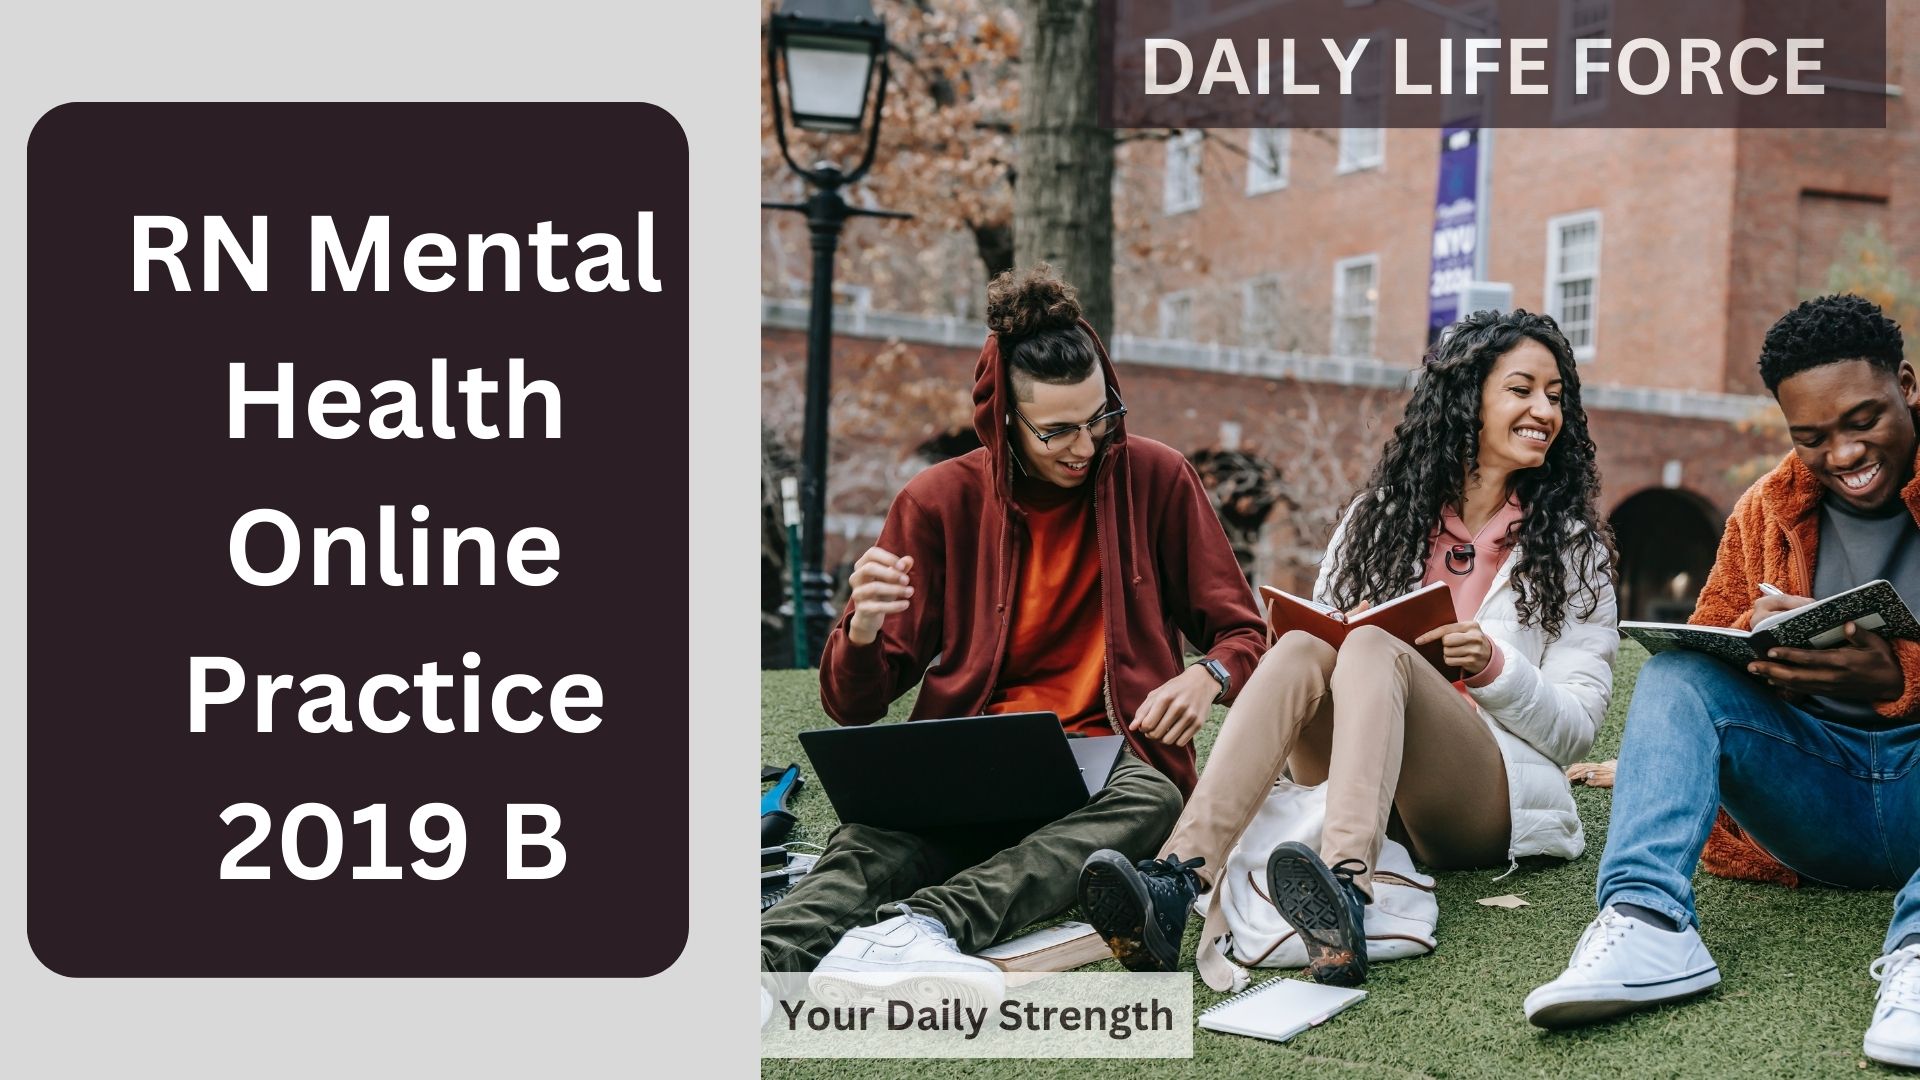 RN Mental Health Online Practice 2019 b With NGN Guide Daily Life Force